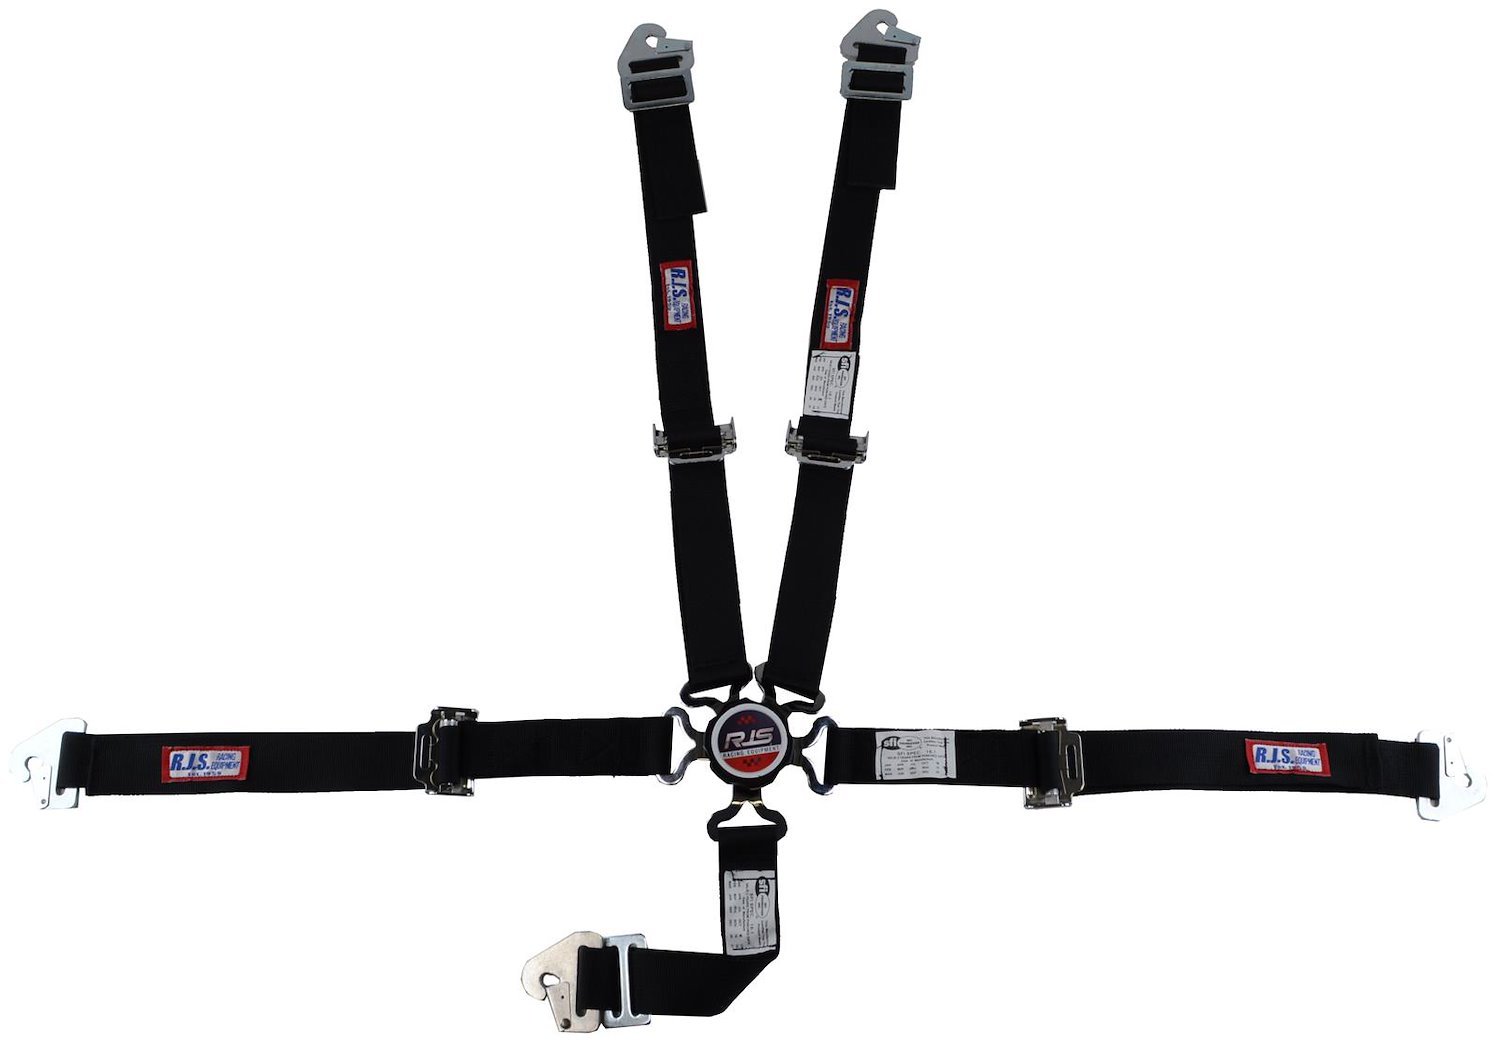 SFI 16.1 CAM-LOCK HARNESS 2 PULL UP Lap Belt 2 Shoulder Harness V ROLL BAR Mount 2 DOUBLE Sub ALL SNAP ENDS KHAKI